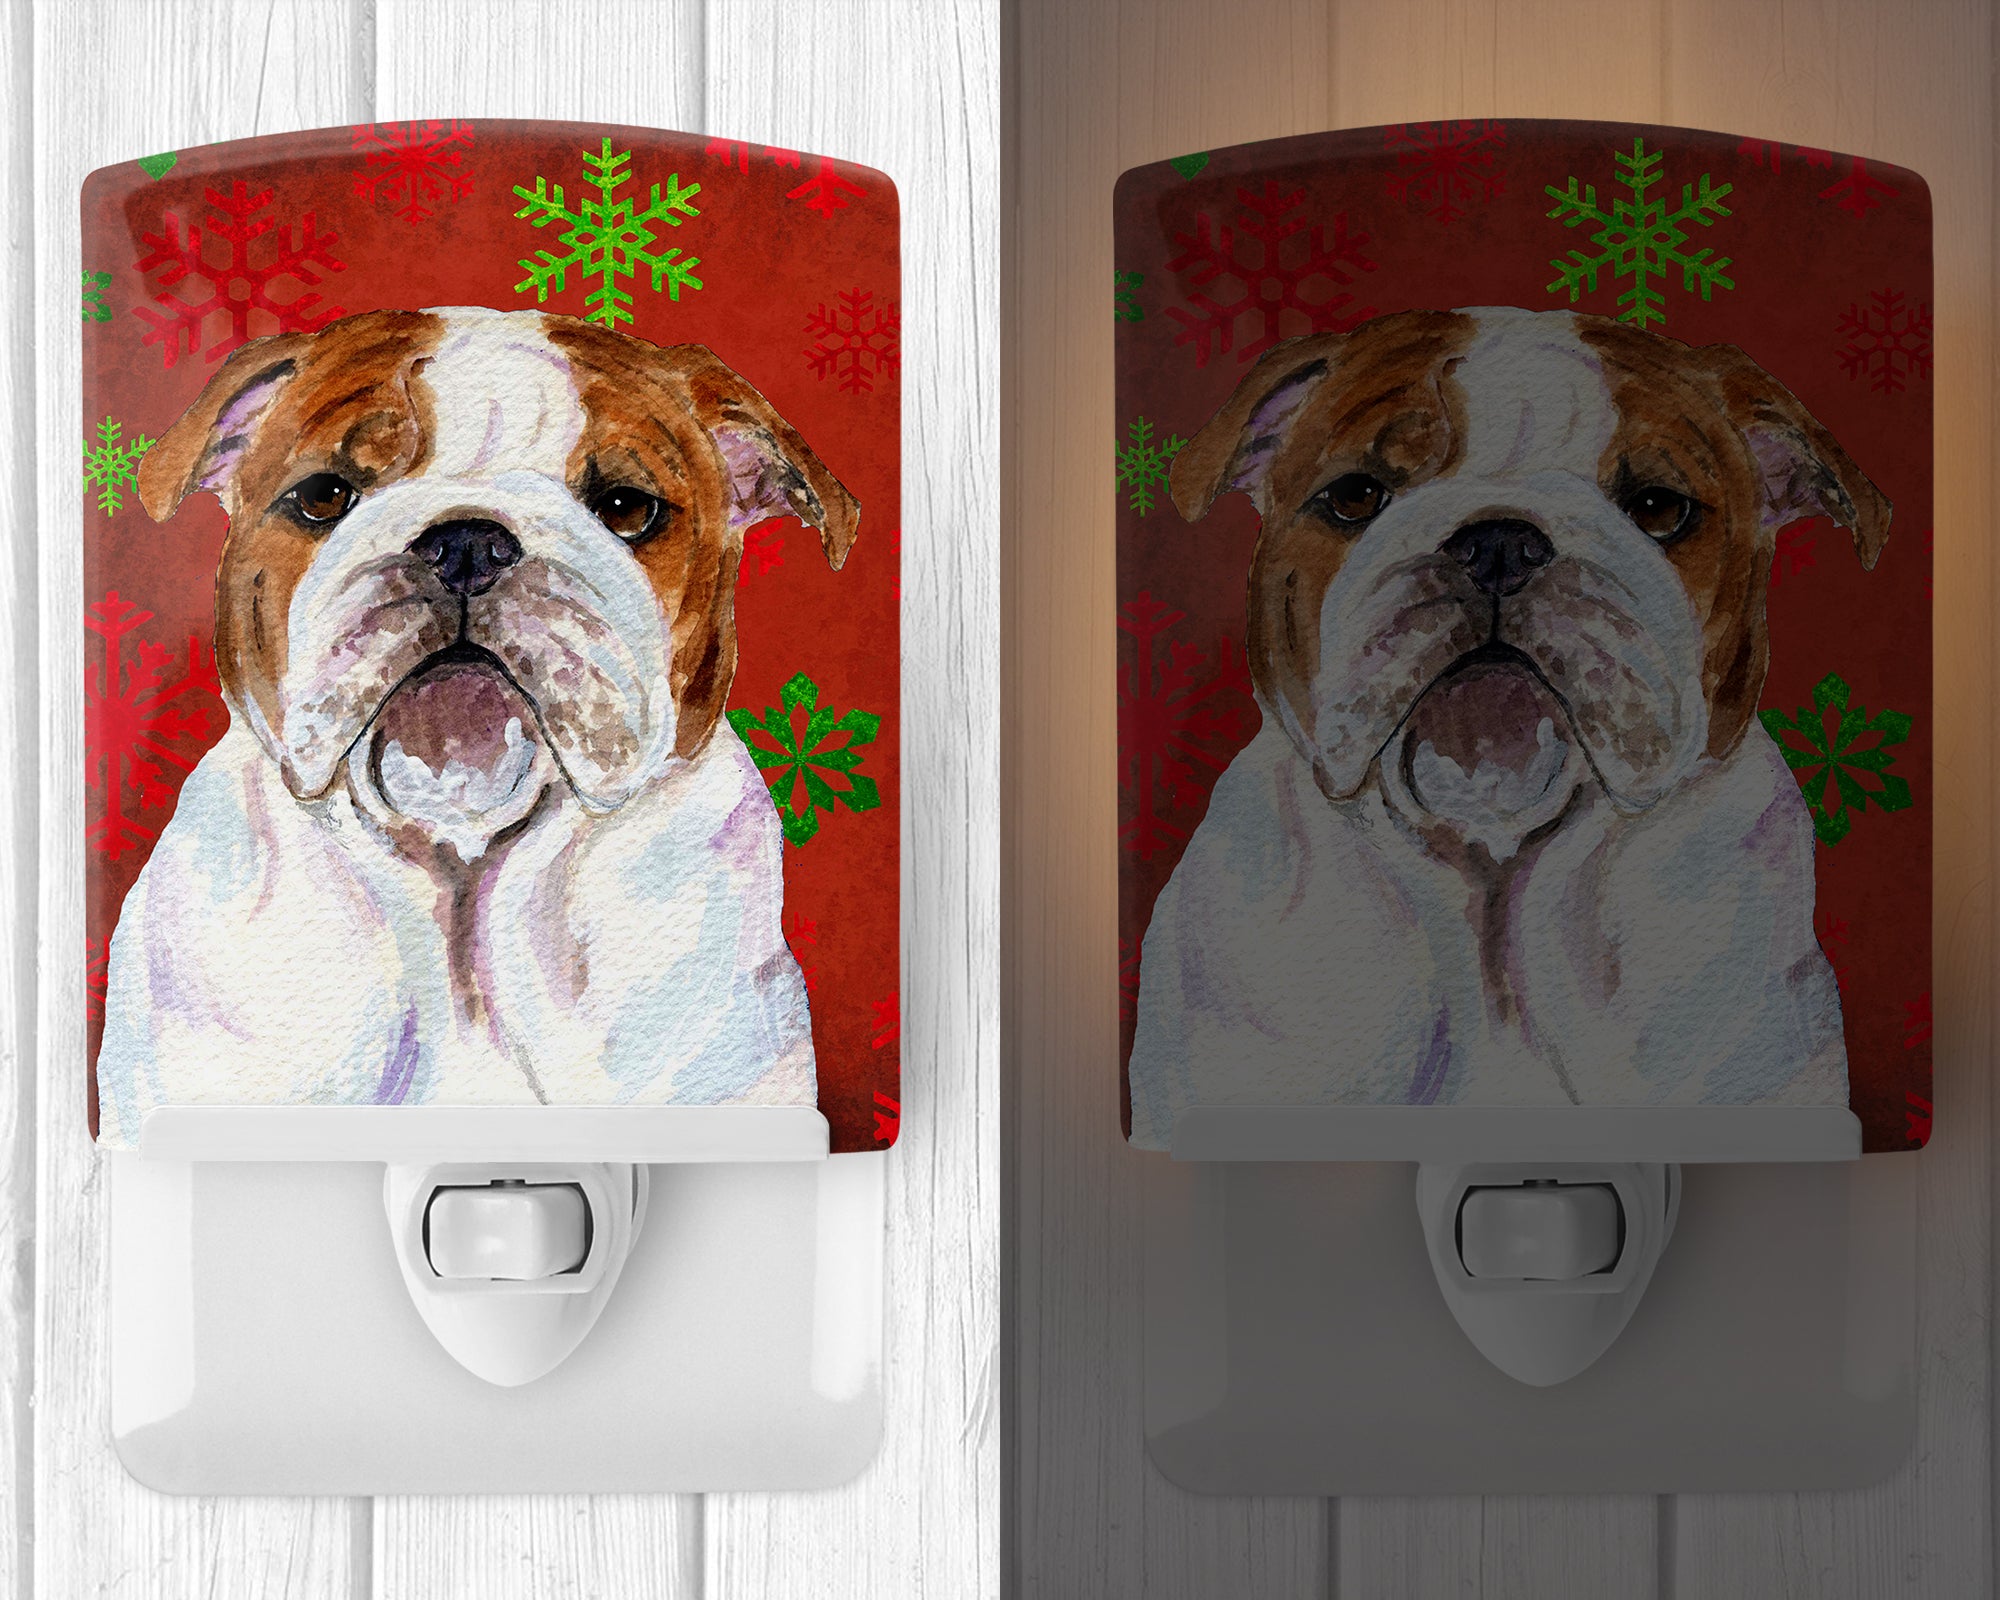 Bulldog English Red and Green Snowflakes Holiday Christmas Ceramic Night Light SS4691CNL - the-store.com